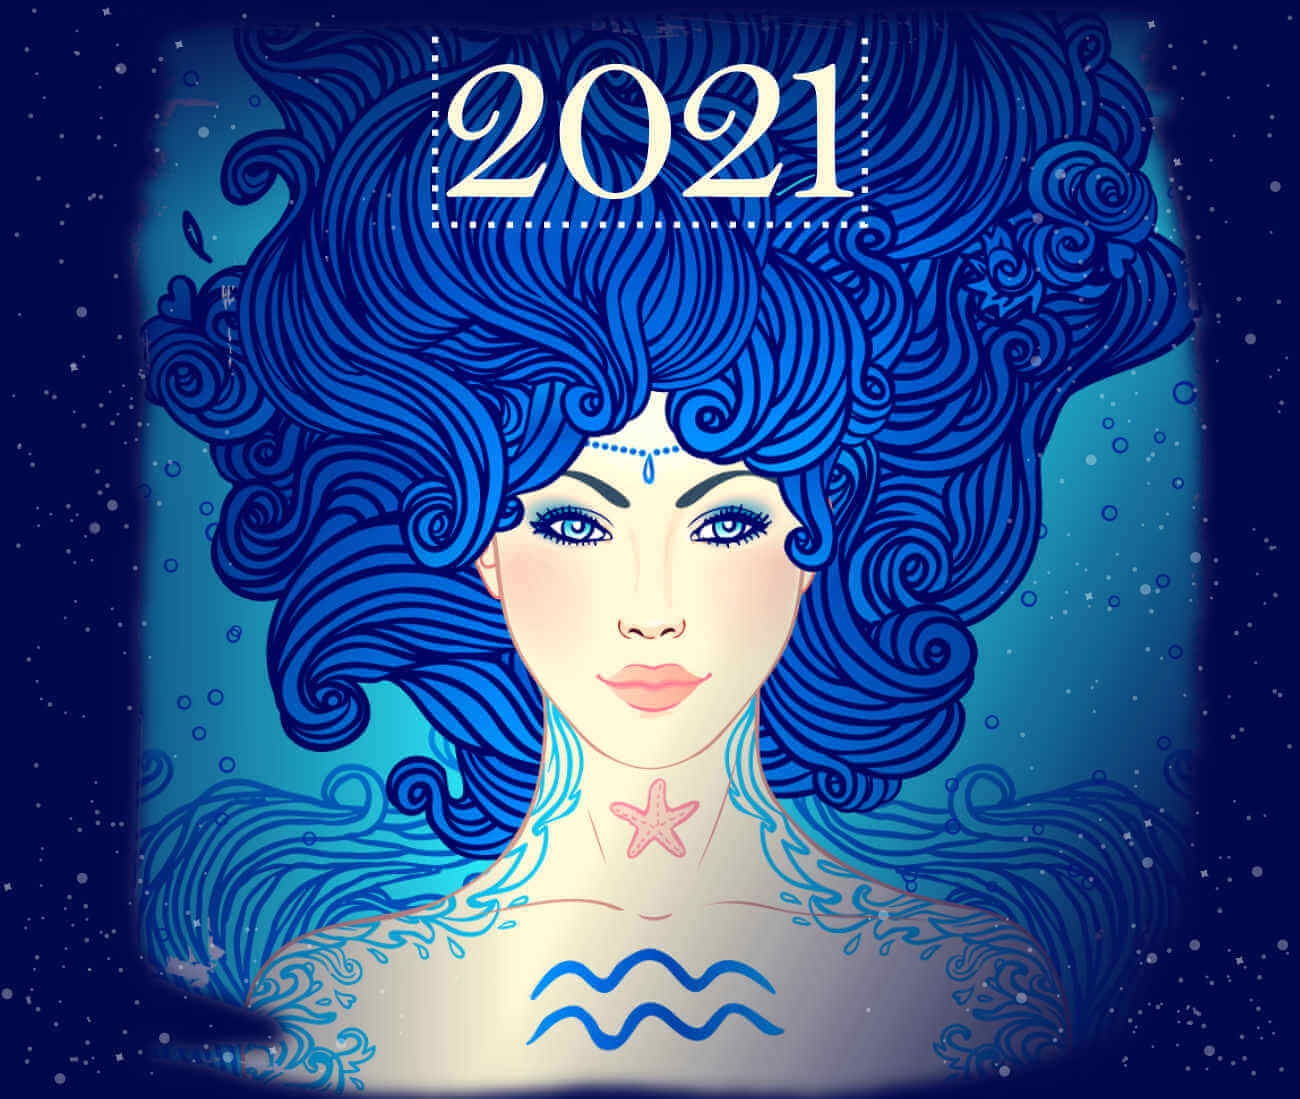 Astrologer Susan Miller Names the Zodiac Sign That"s Going To Have the Best 2021